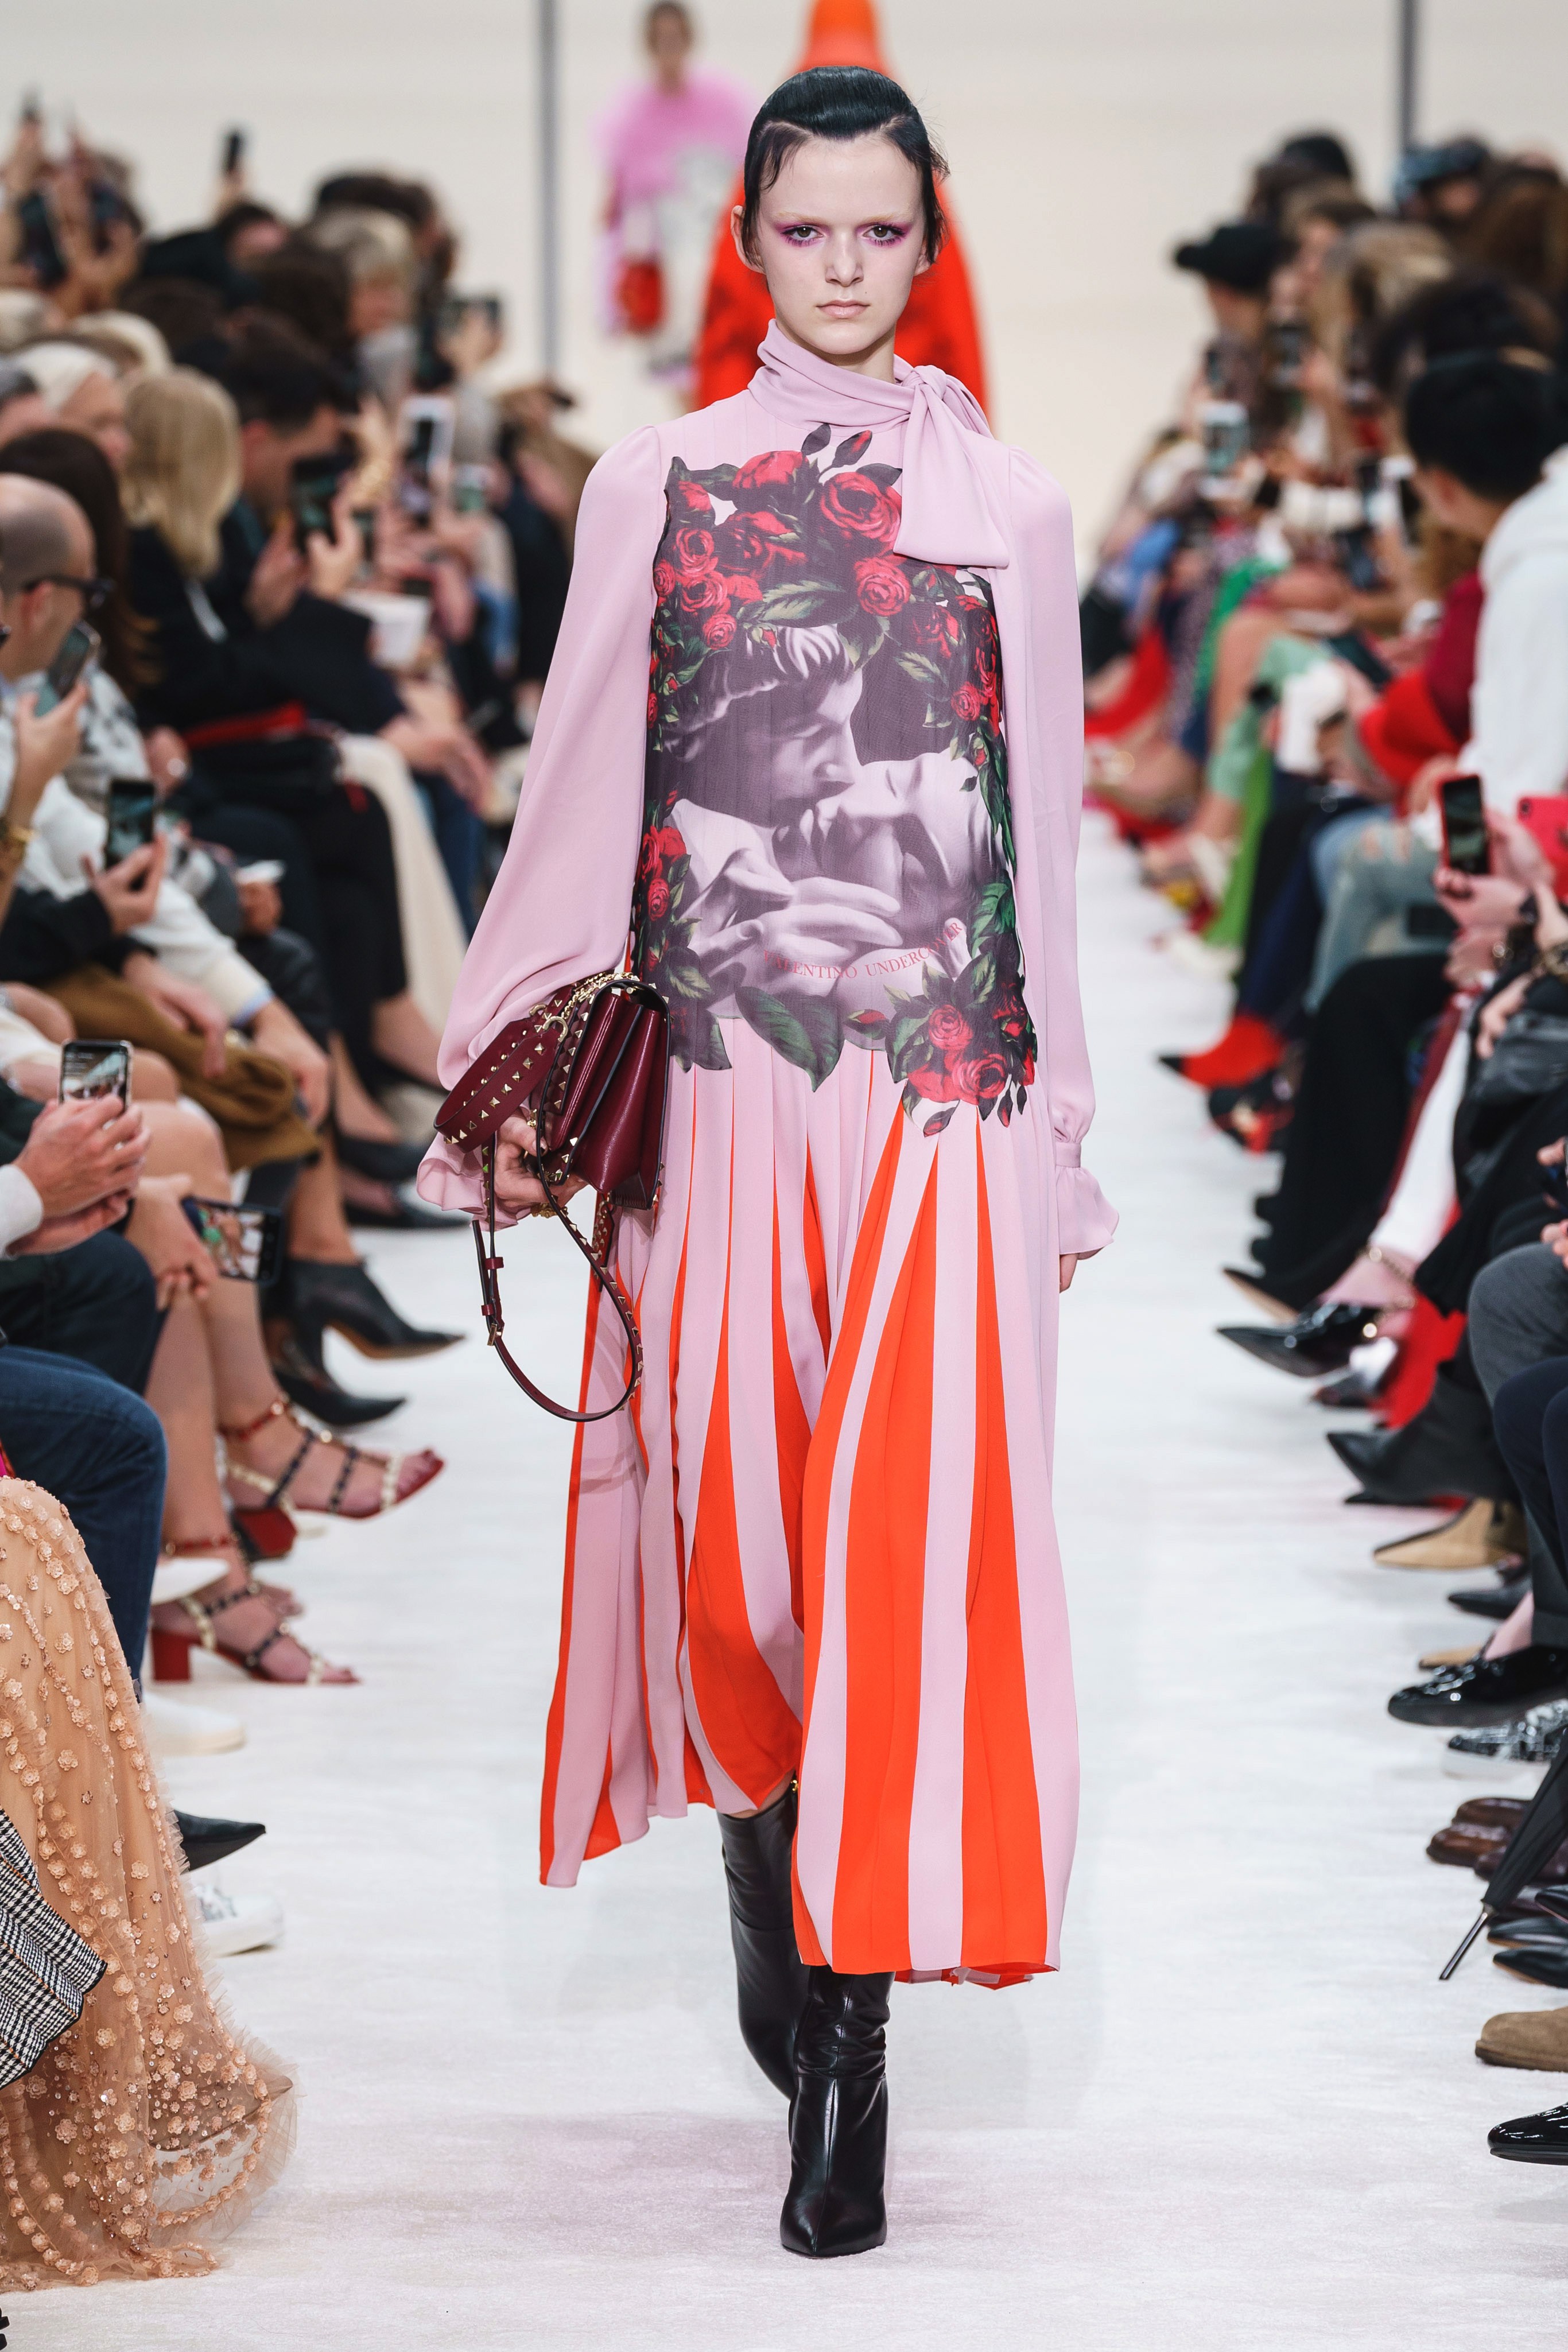 In the Valentino Show in the City of Love, Everyone Scores a Rose - V ...